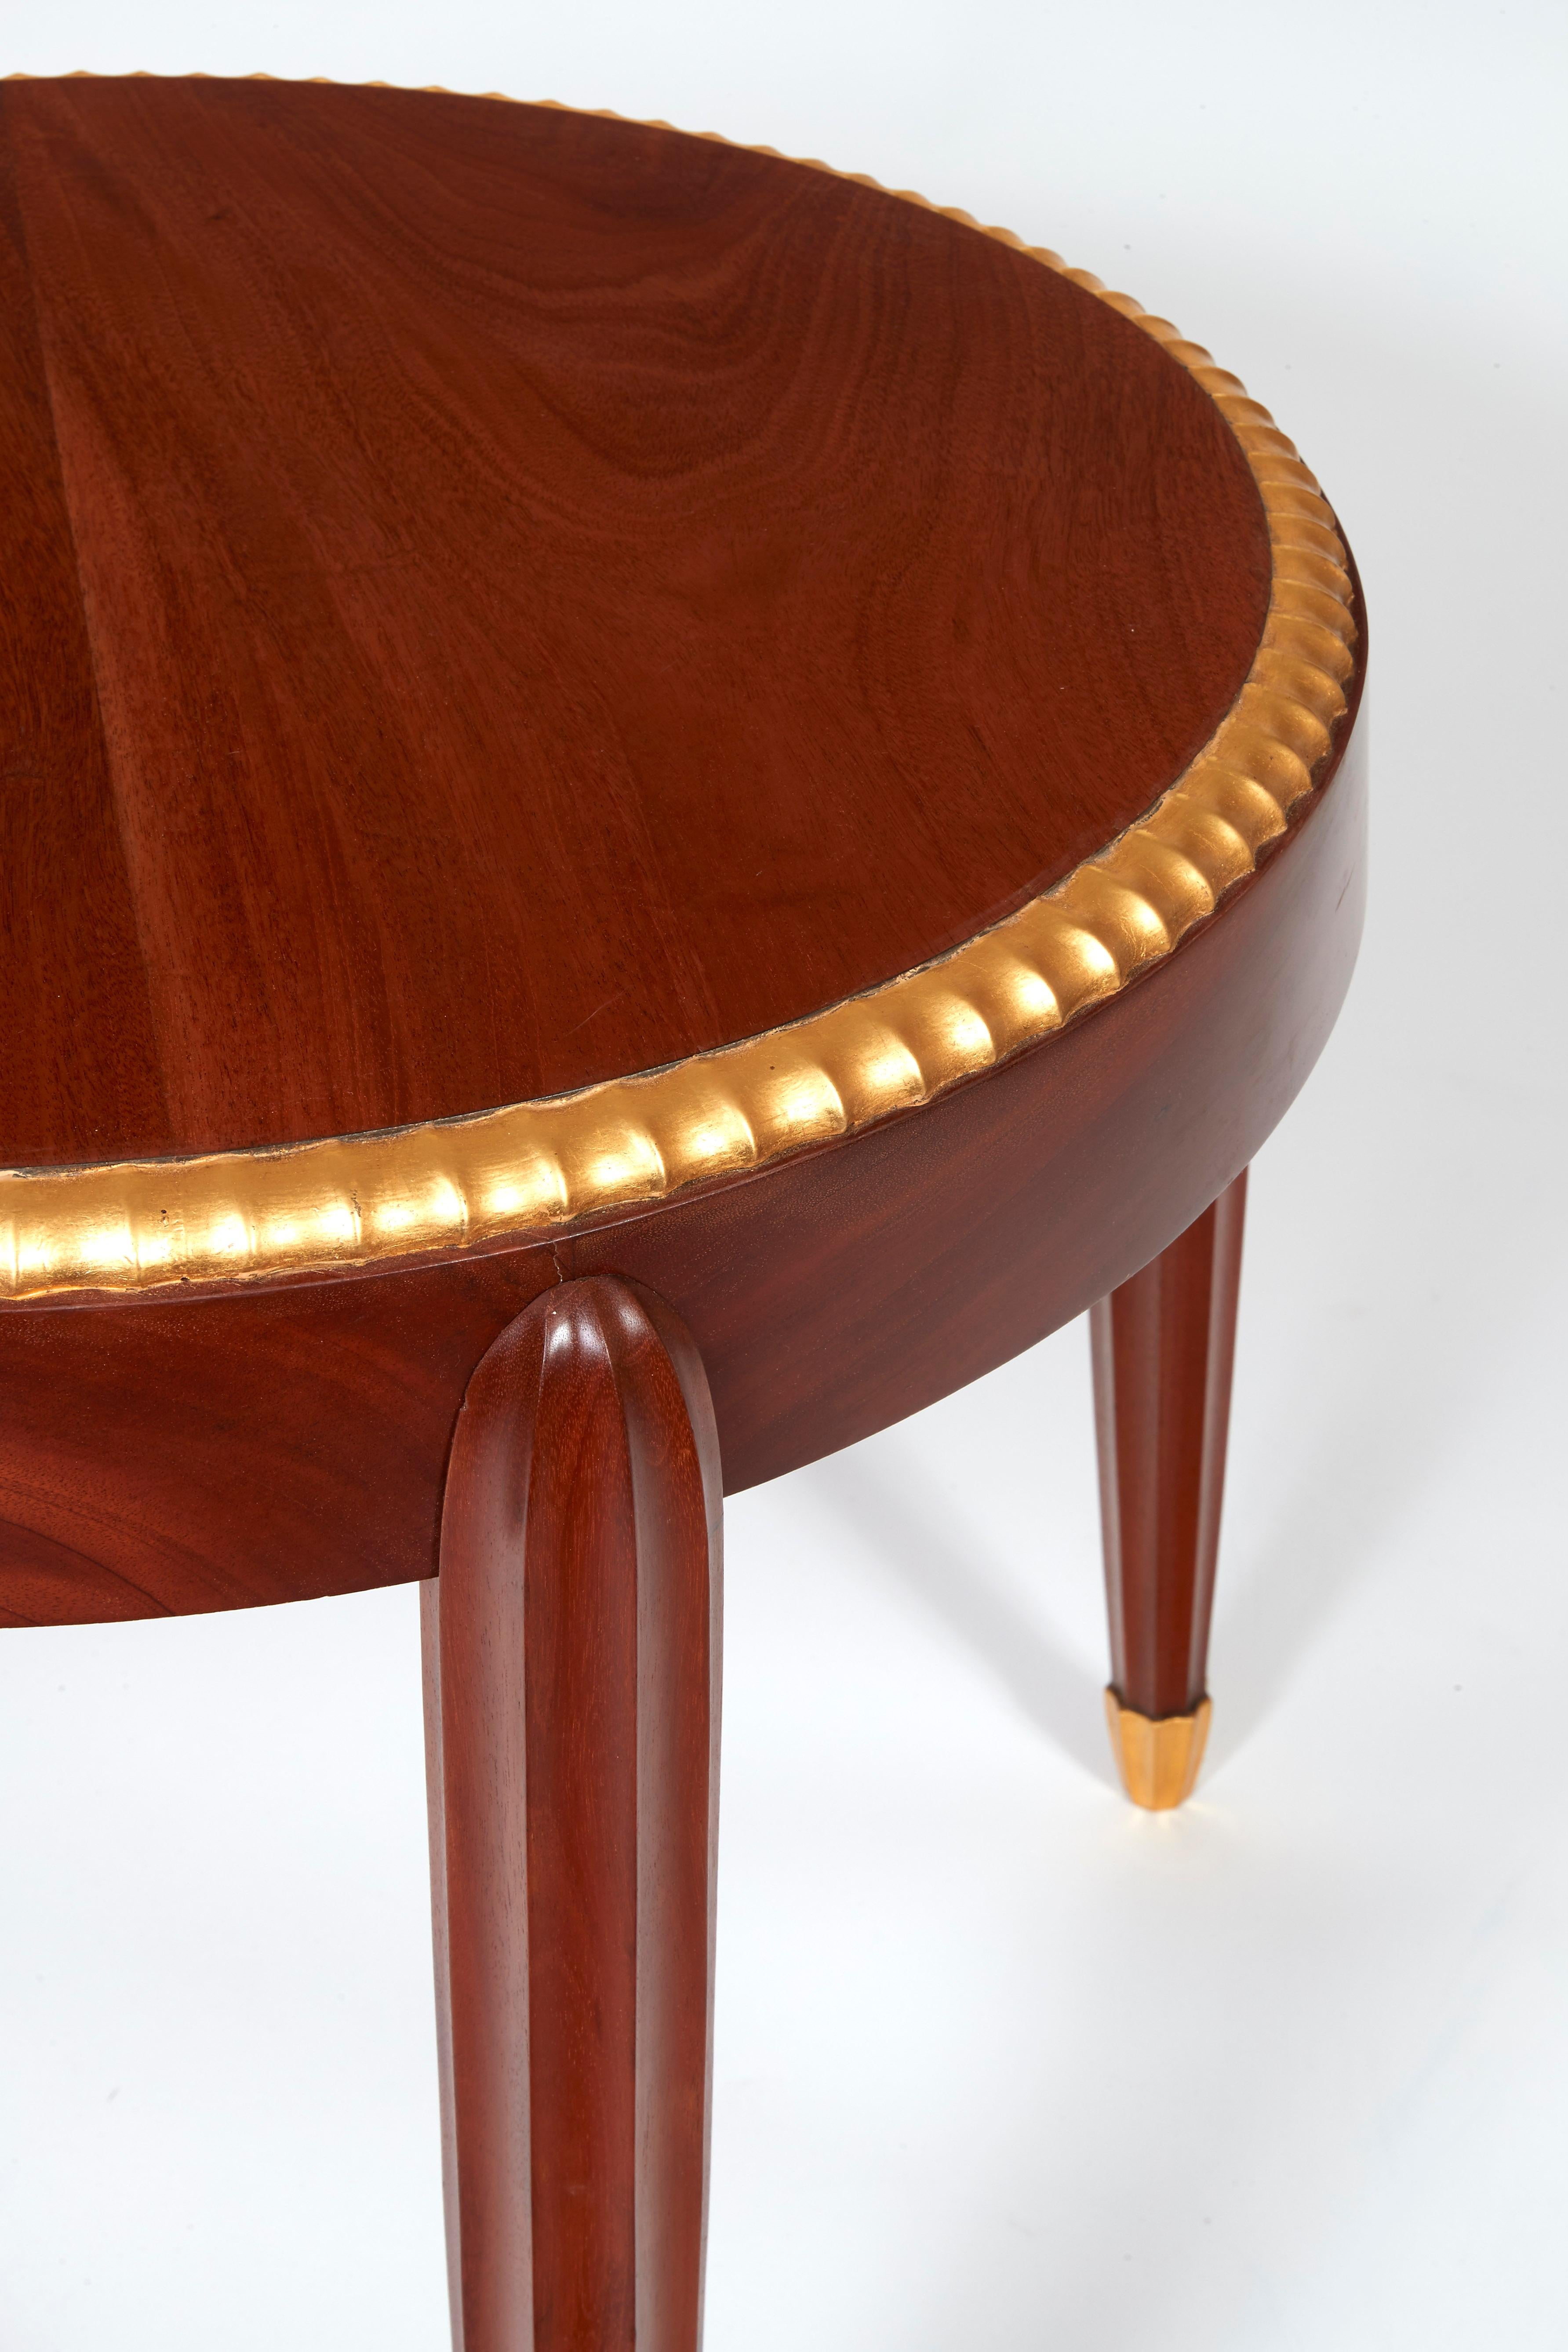 French Jules Leleu, Pedestal Table in Mahogany Wood and Golden Leaves, circa 1925